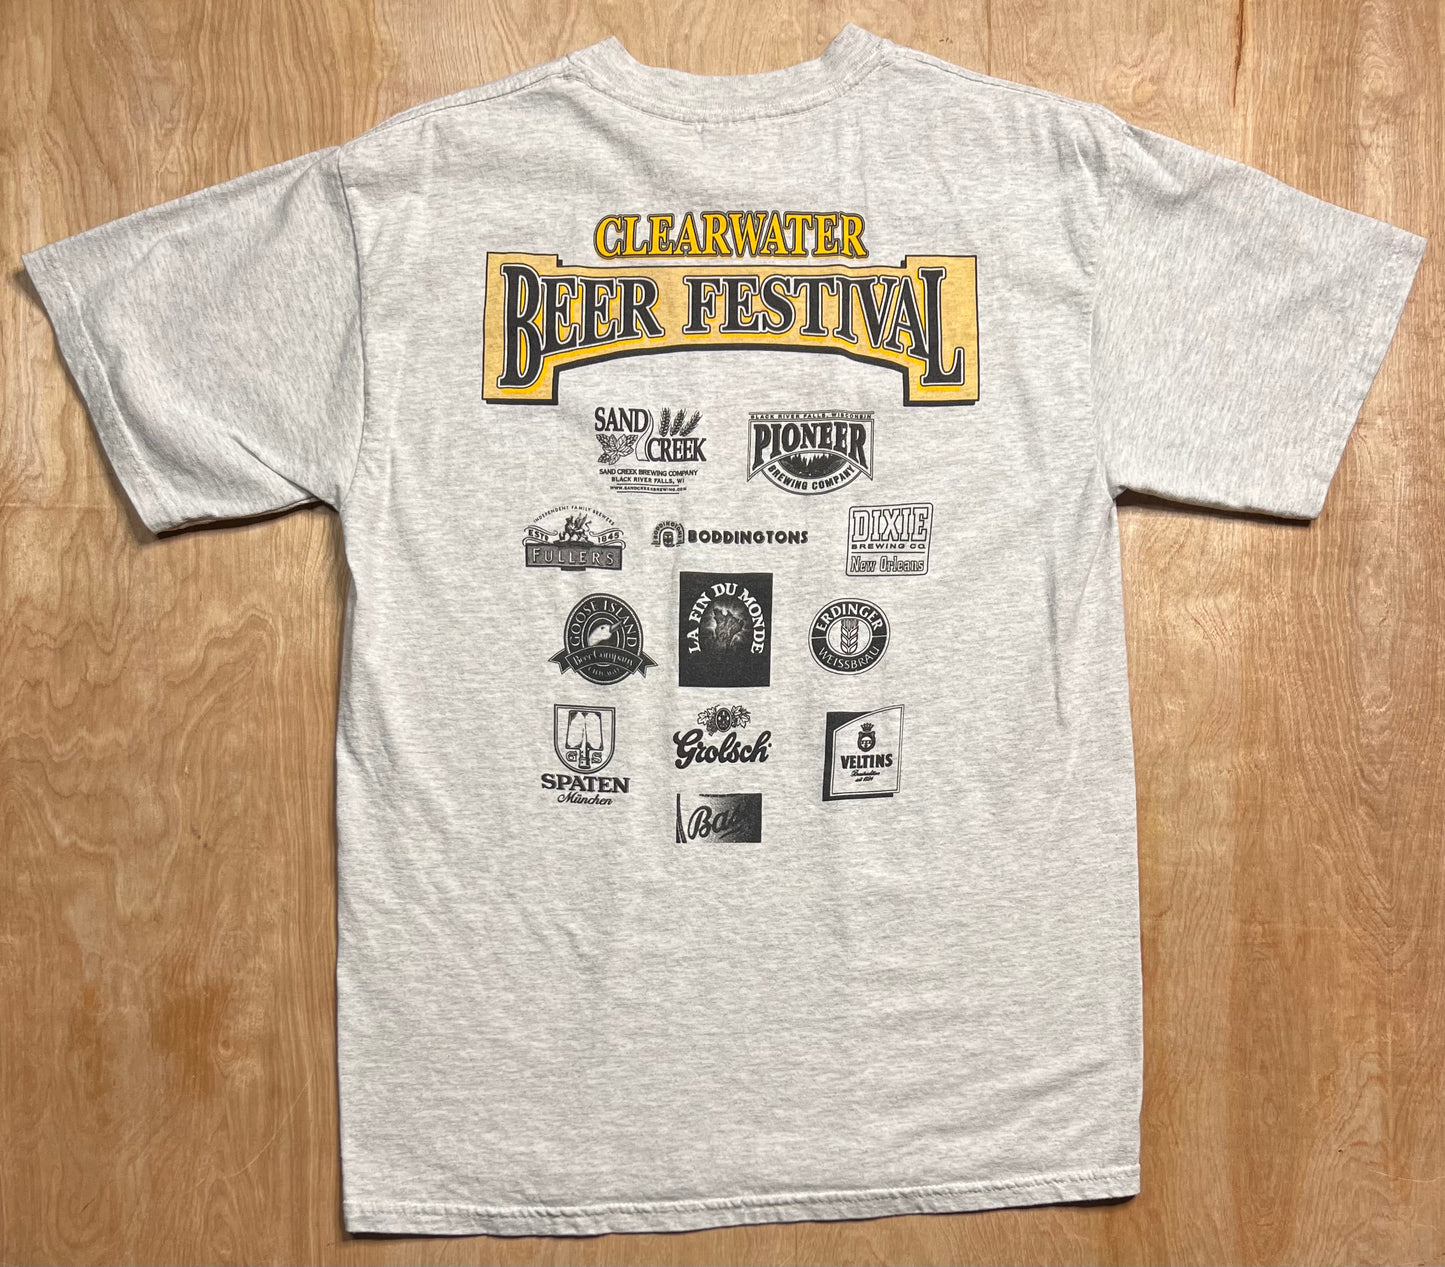 2004 Clearwater Beer Festival Eau Claire, Wisconsin T-Shirt